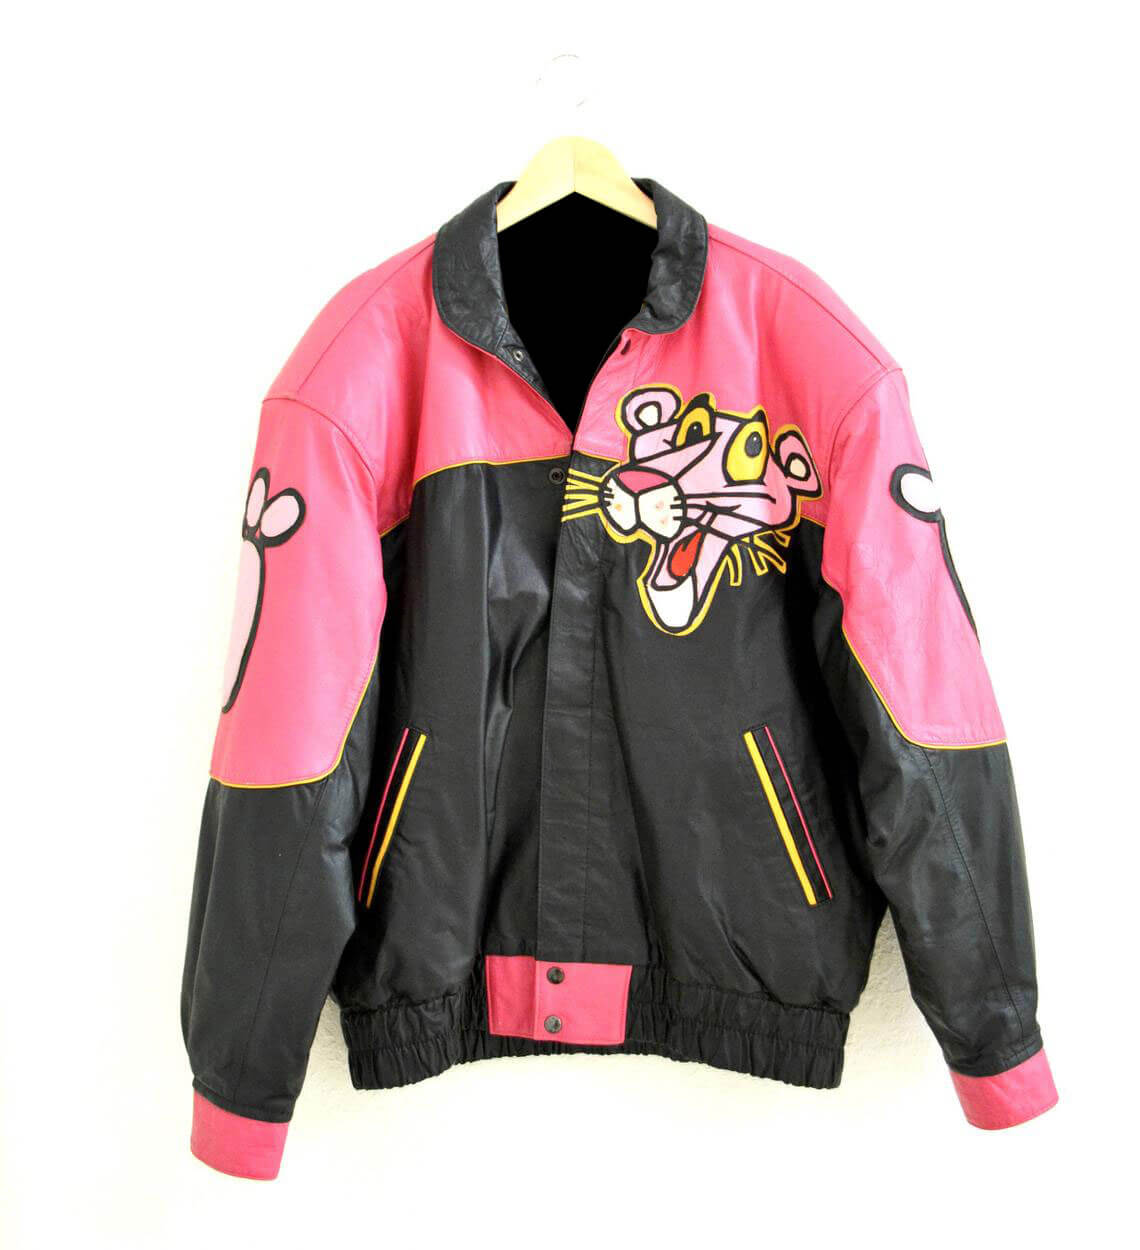 jackets anime - Buy jackets anime at Best Price in Malaysia |  h5.lazada.com.my